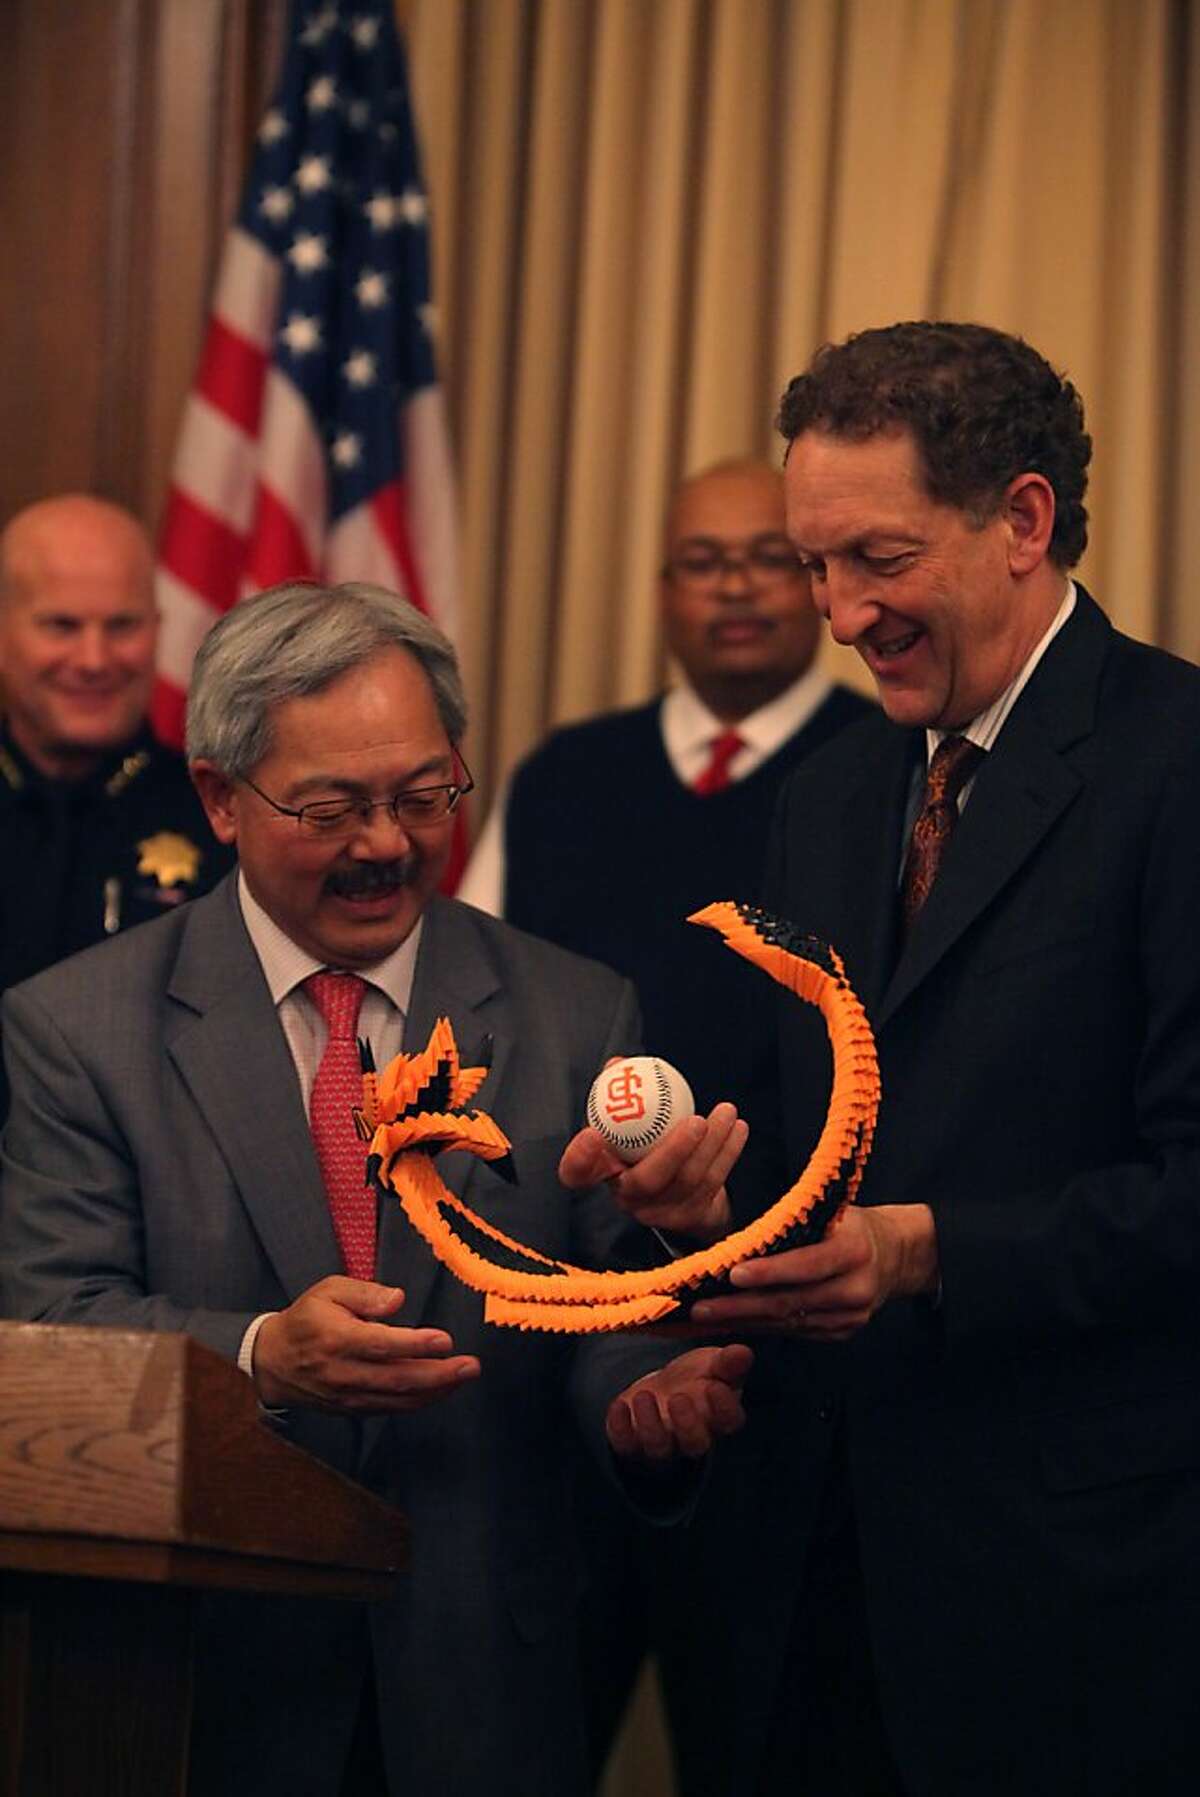 Mayor Ed Lee (l to r) stands with Giants CEO Larry Baer as Baer holds a paper dragon carrying a World Series ball presented to him during a press conference regarding the World Series Championship Parade and Civic Celebration at the Mayor's Office on Tuesday, October 30, 2012 in San Francisco, Calif.